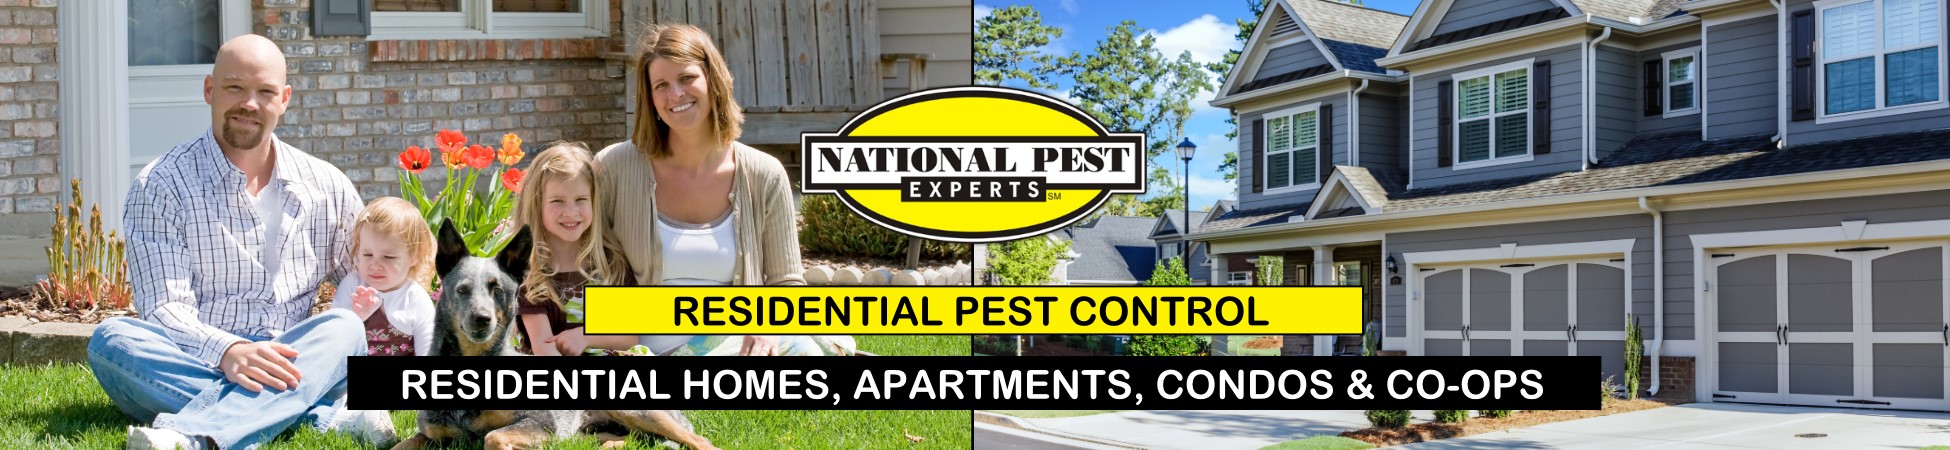 National Pest Experts - Residential exterminating and pest control in Elwood, NY